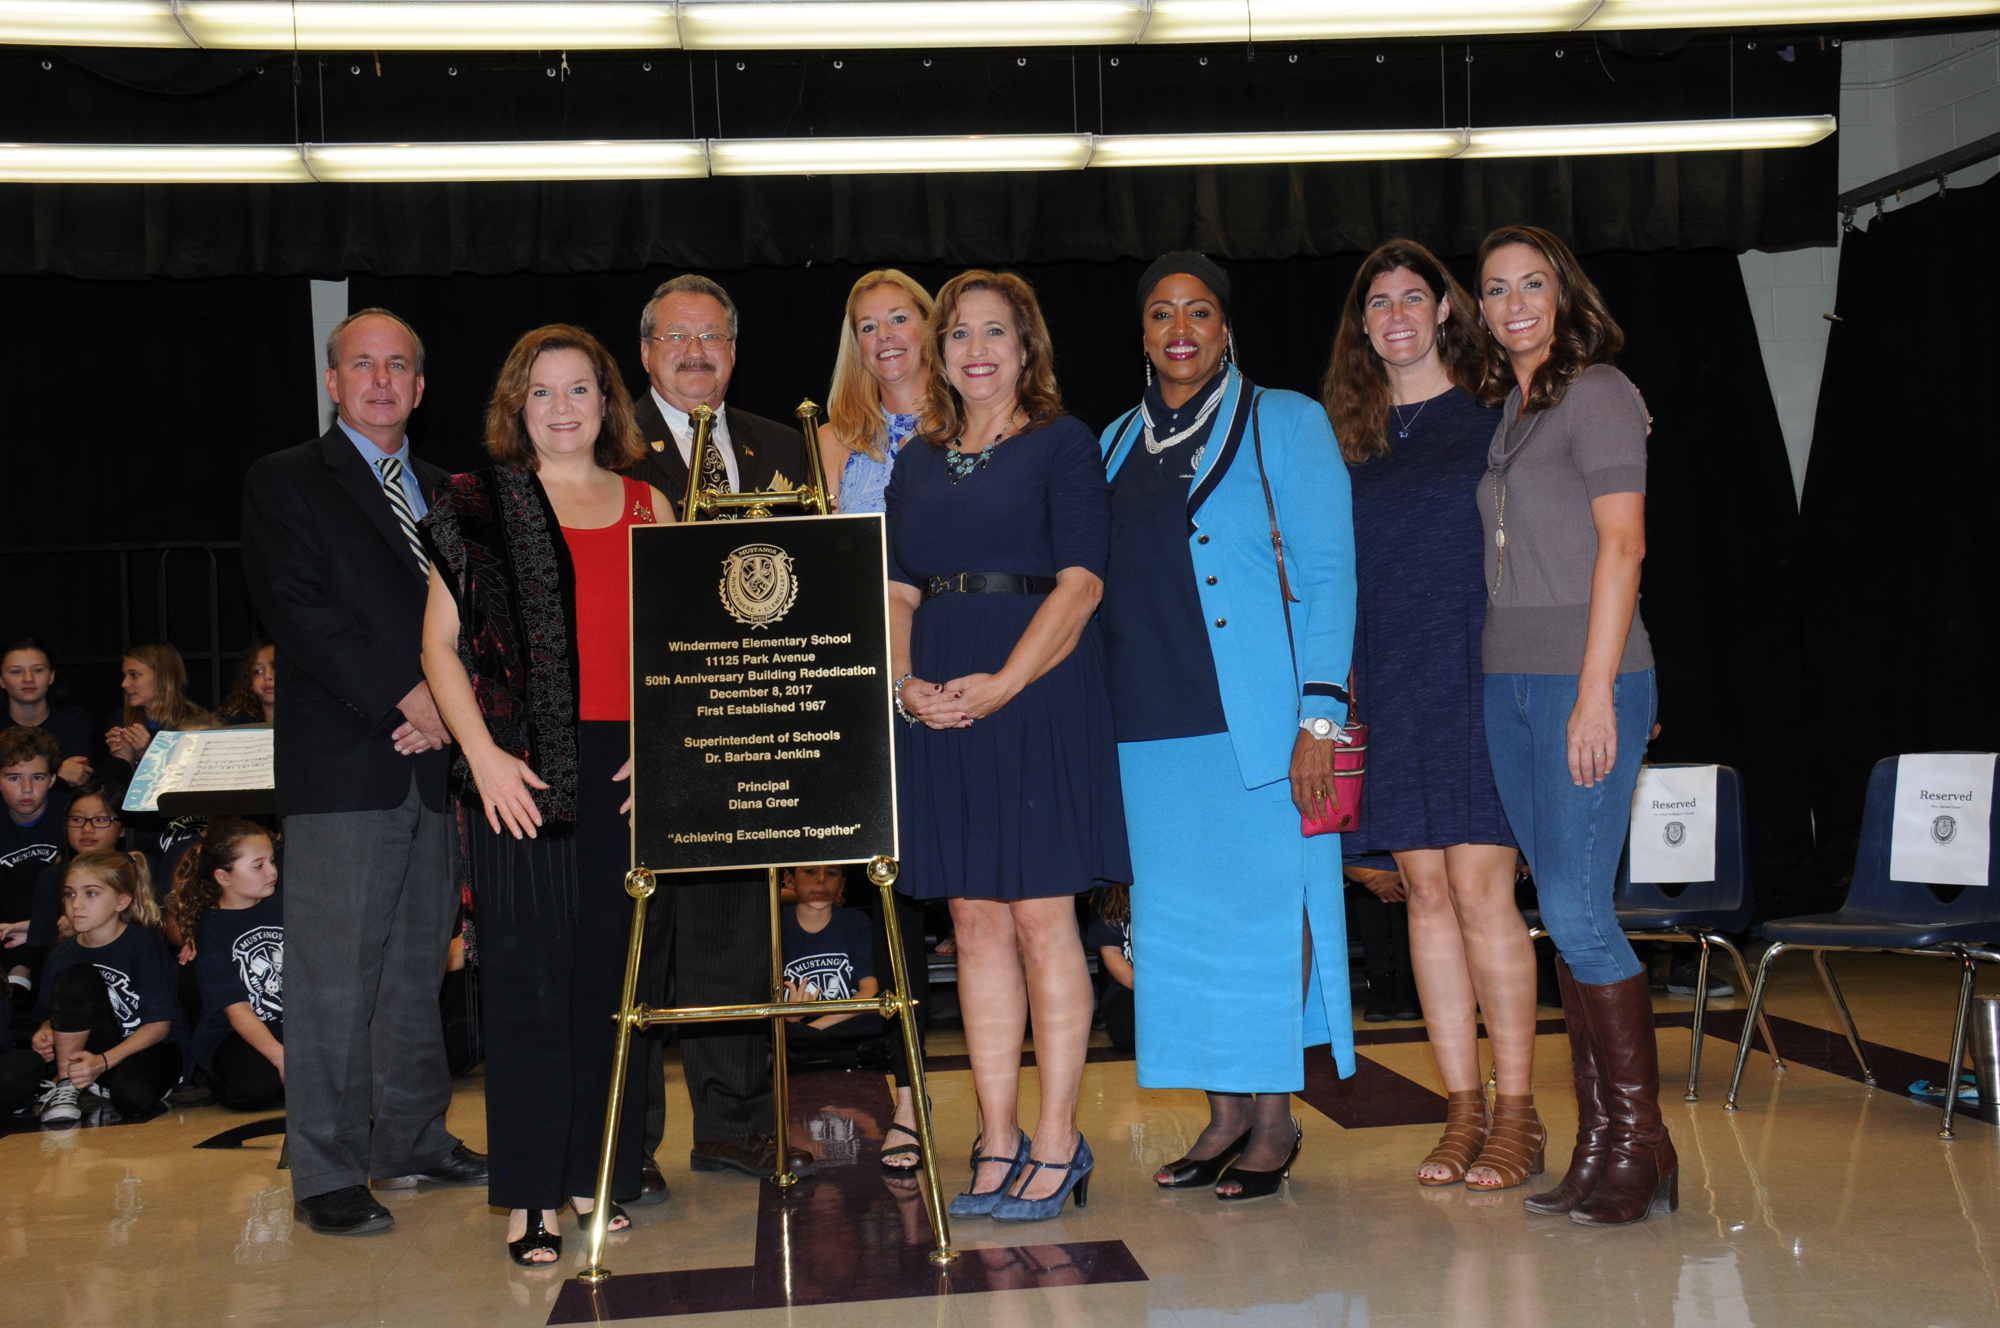 Windermere Elementary received a plaque celebrating the rededication of the school. With the marker are Greg Moody, Pam Gould, Gary Bruhn, Michaal Rossi, Diana Greer, Ethel Wellington-Trawick, Judy Paulsen and Dean Malley.